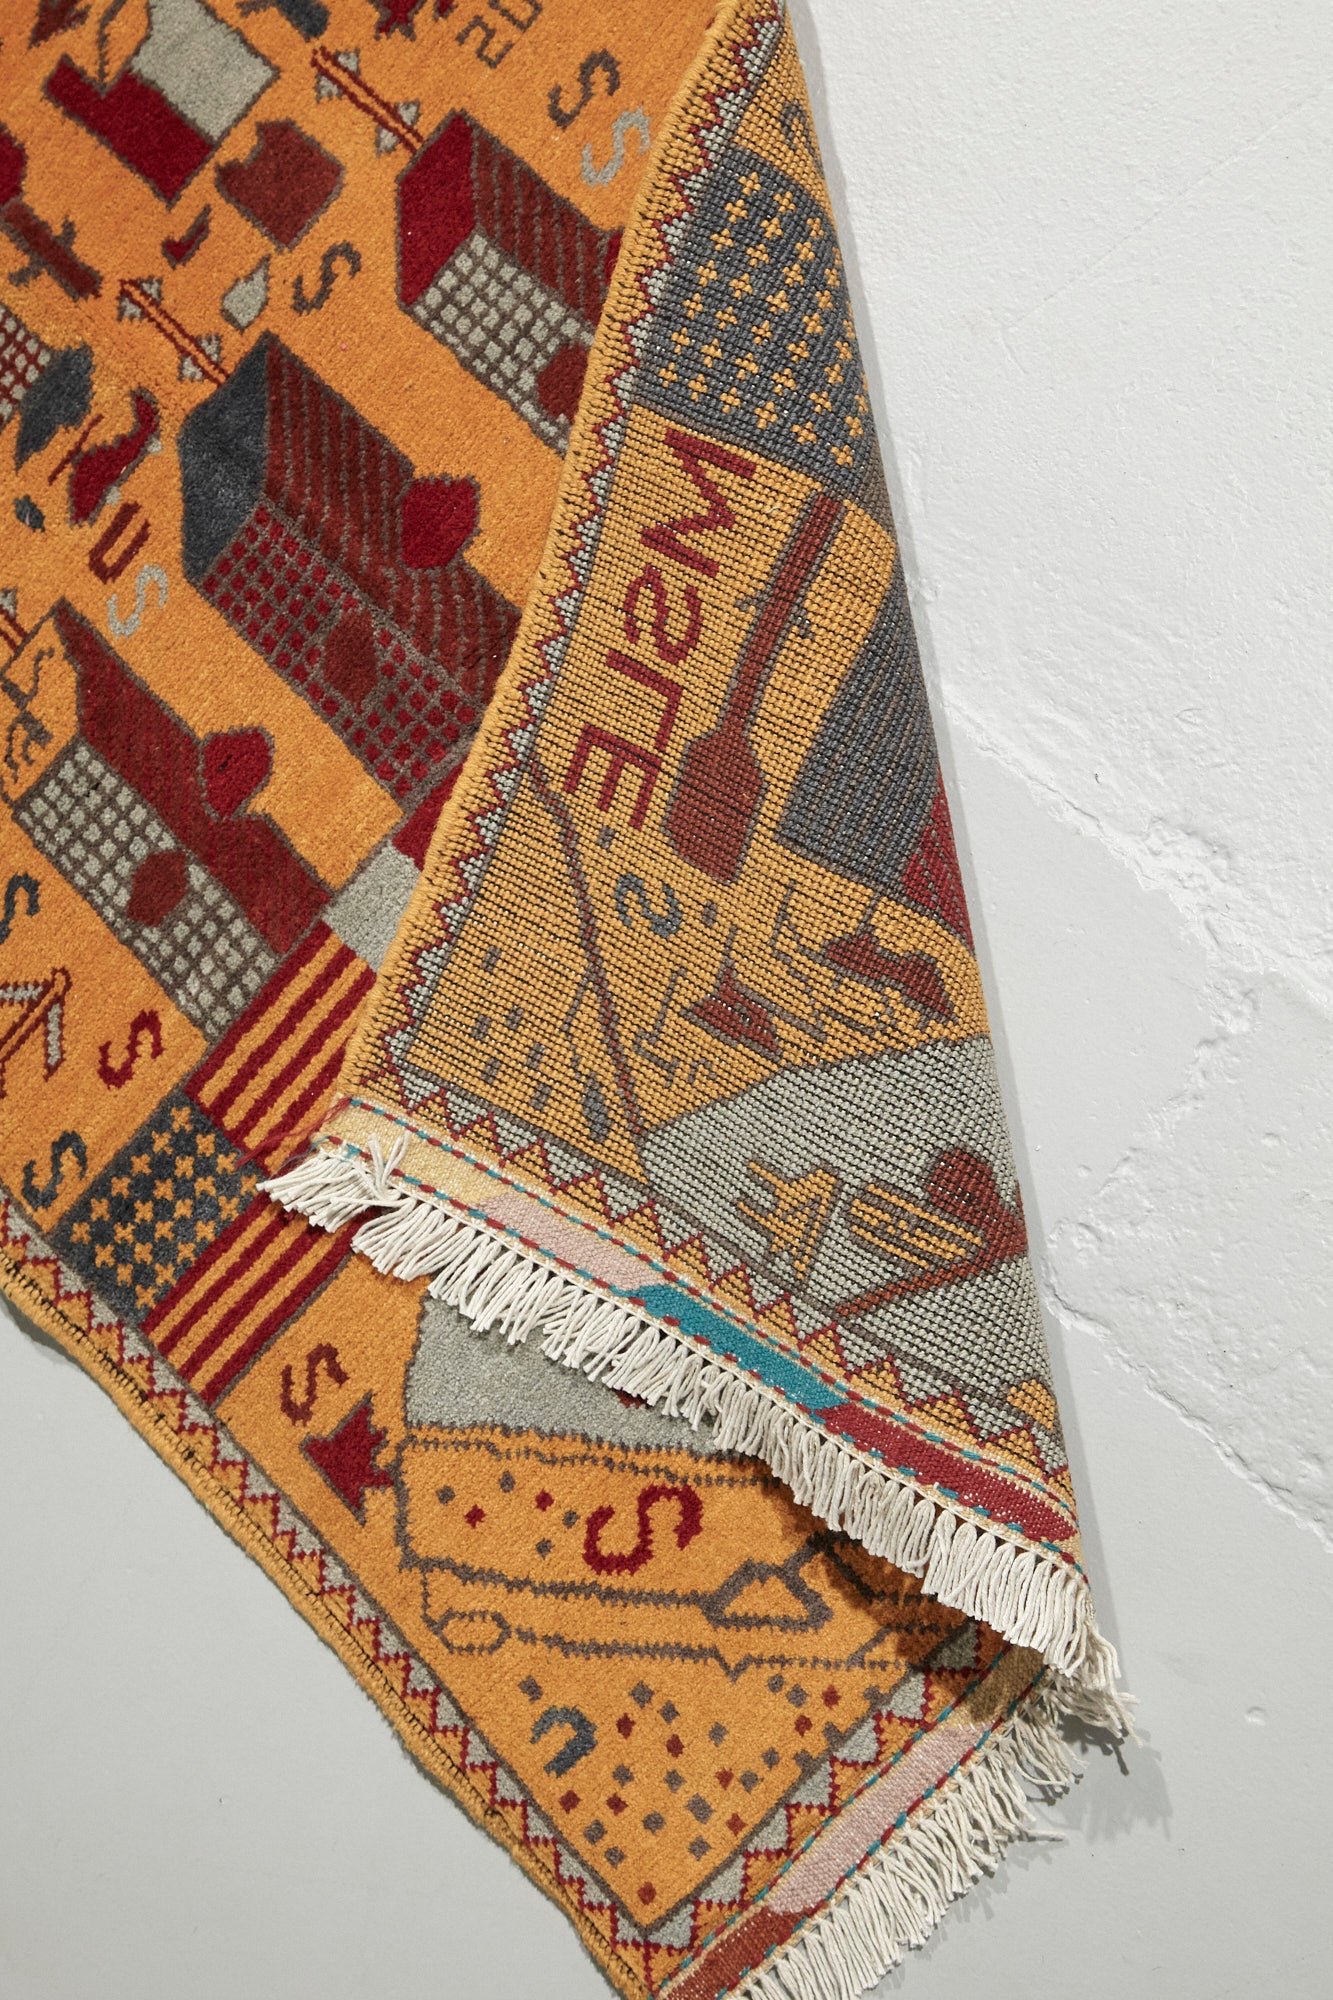 Afghan War Rug - Handwoven with images of twin towers, planes, helicopters available from King Kennedy Rugs Los Angeles